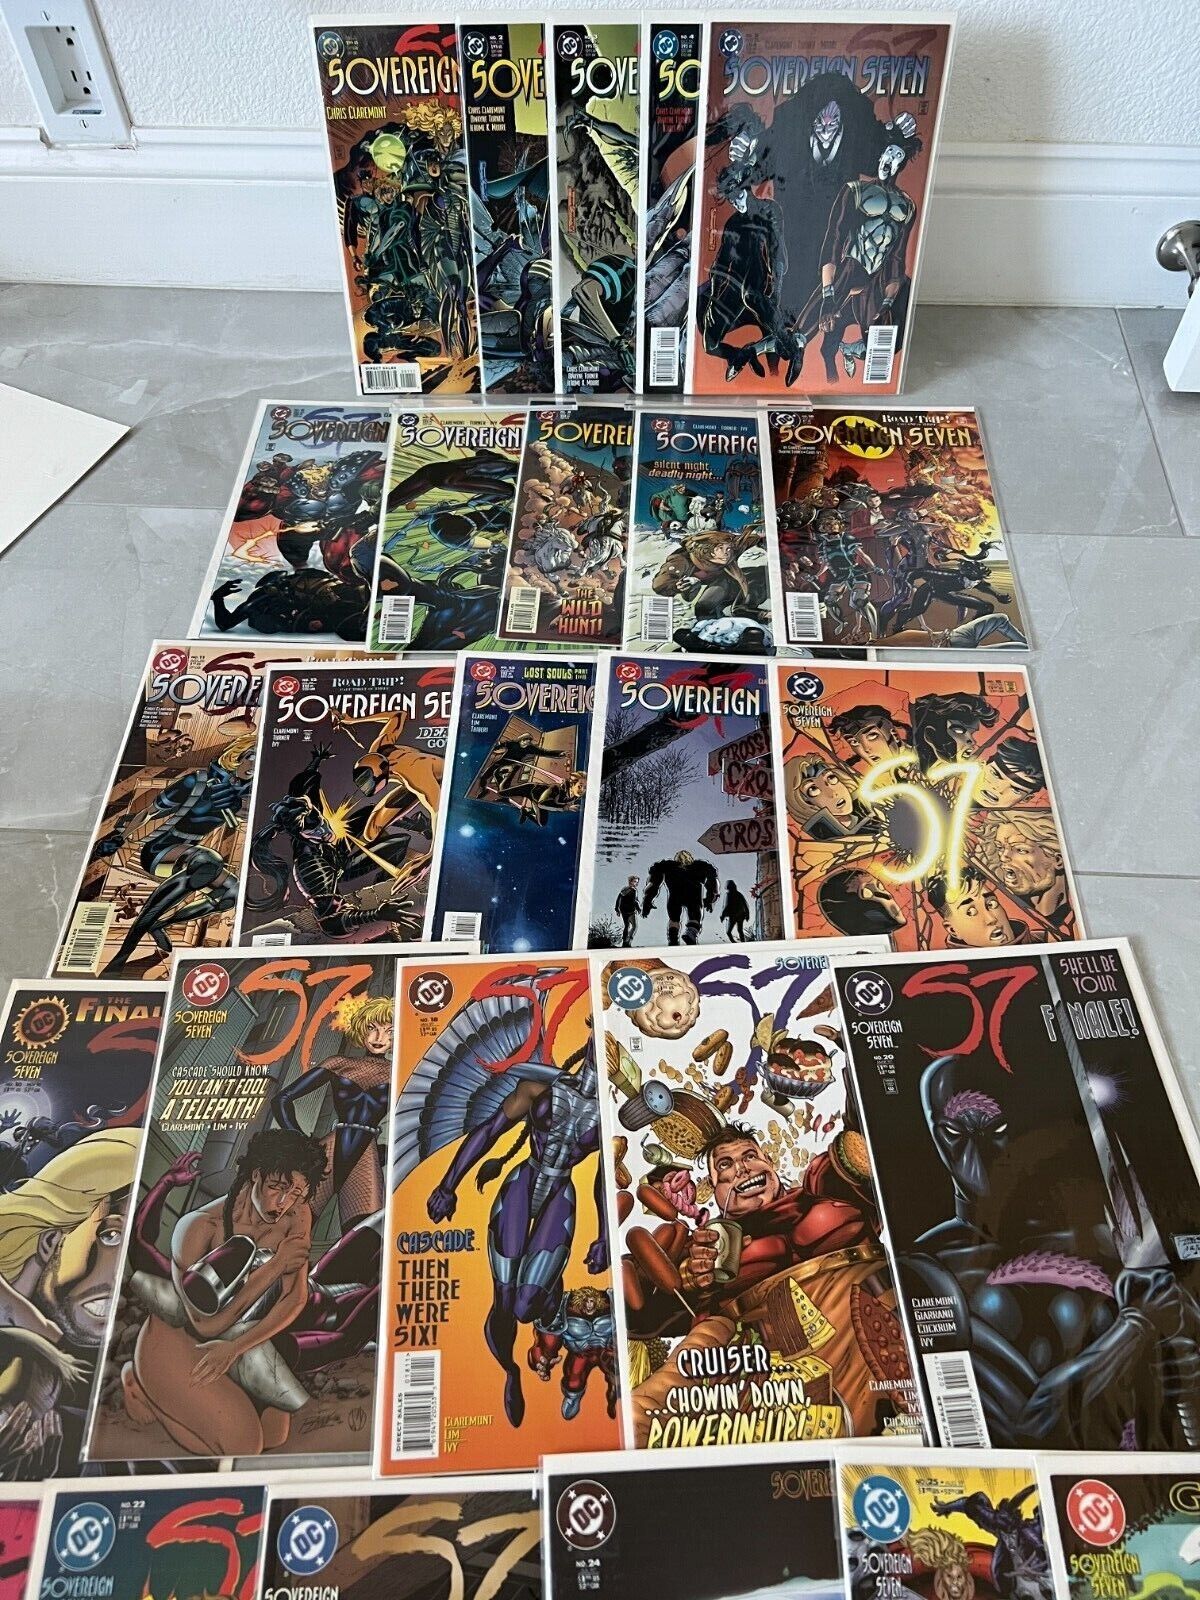 LOT OF 37 SOVEREIGN SEVEN #1-25,27-36 ANNUAL #1-2 NEAR COMPLETE SET DC 1995 NM-